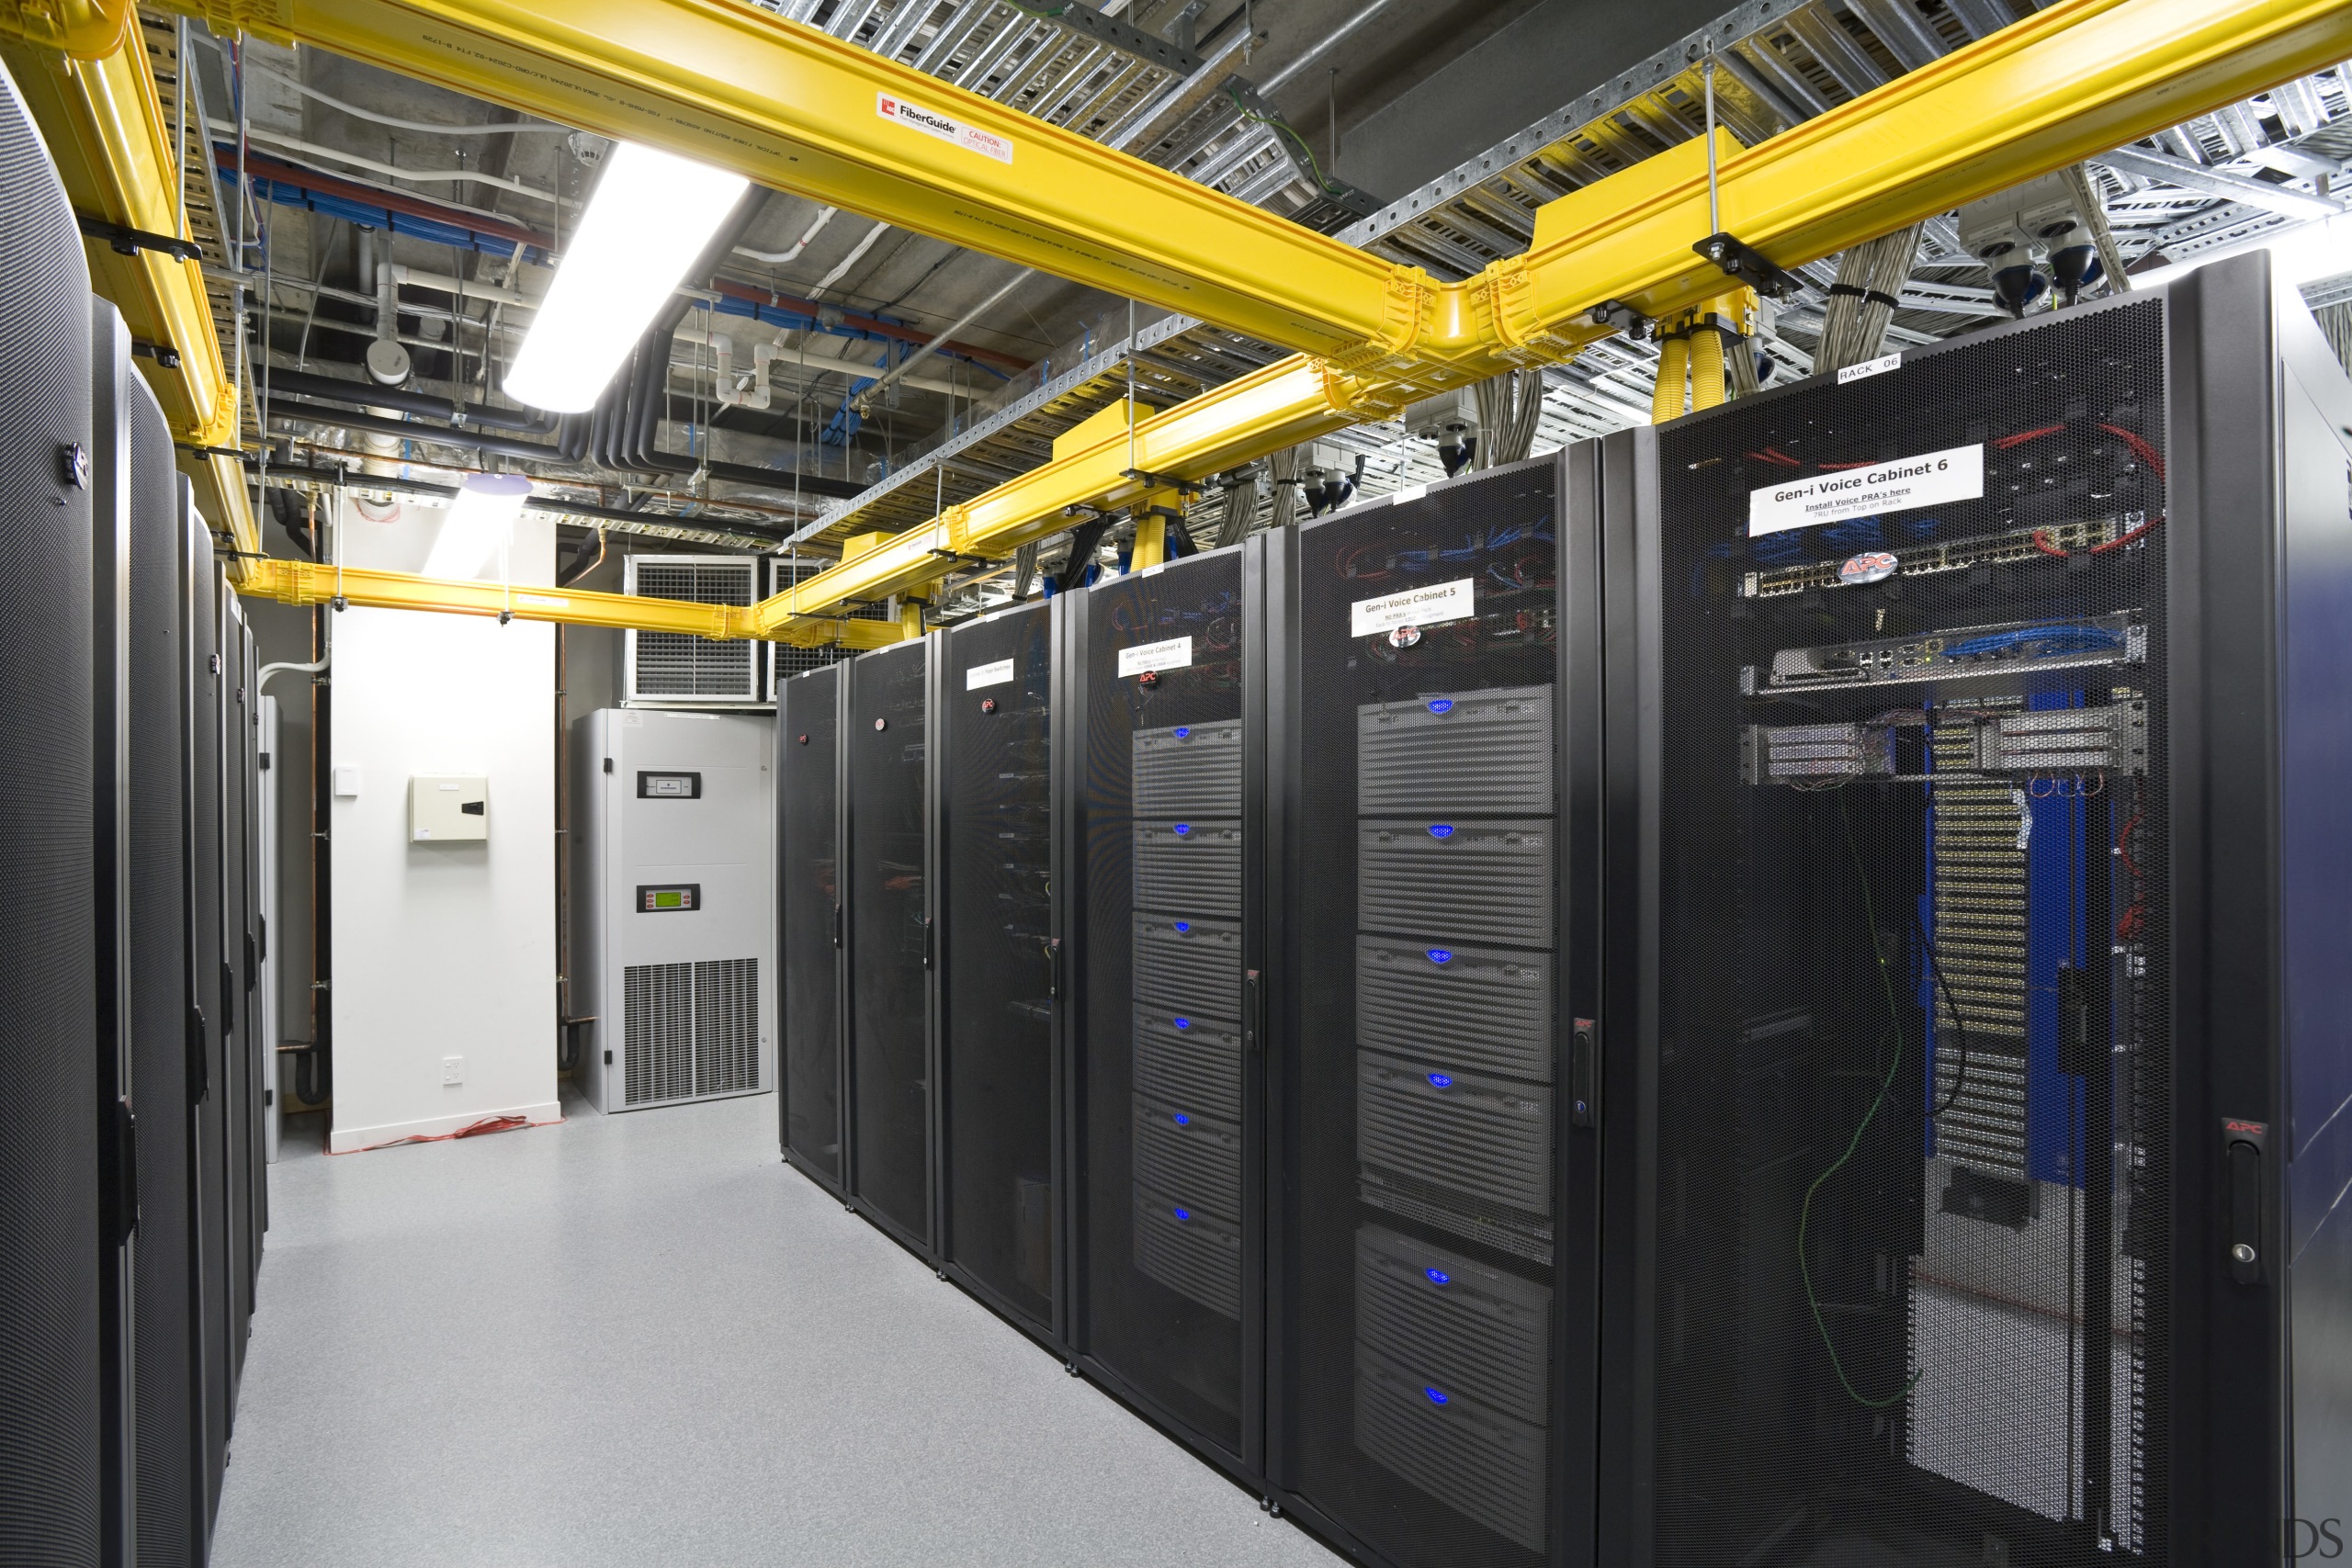 view of the data centre at the Westpac computer, computer case, computer network, electronic device, public transport, server, technology, black, gray